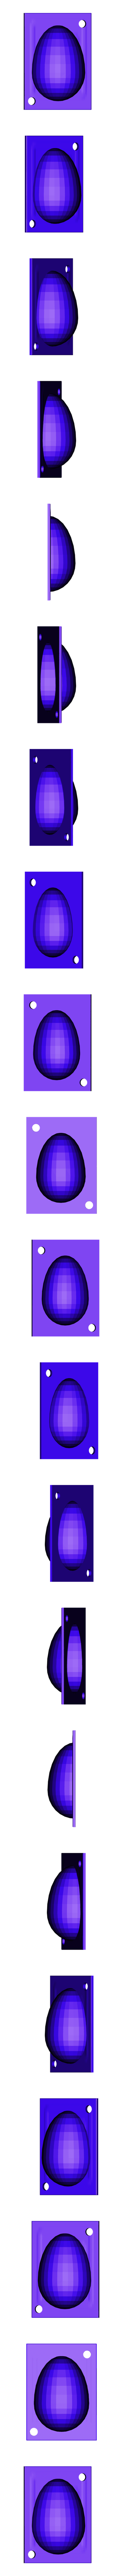 moule_oeuf_petit_fixed.stl Download free STL file Mold for Easter eggs • 3D printing model, Pegazepi